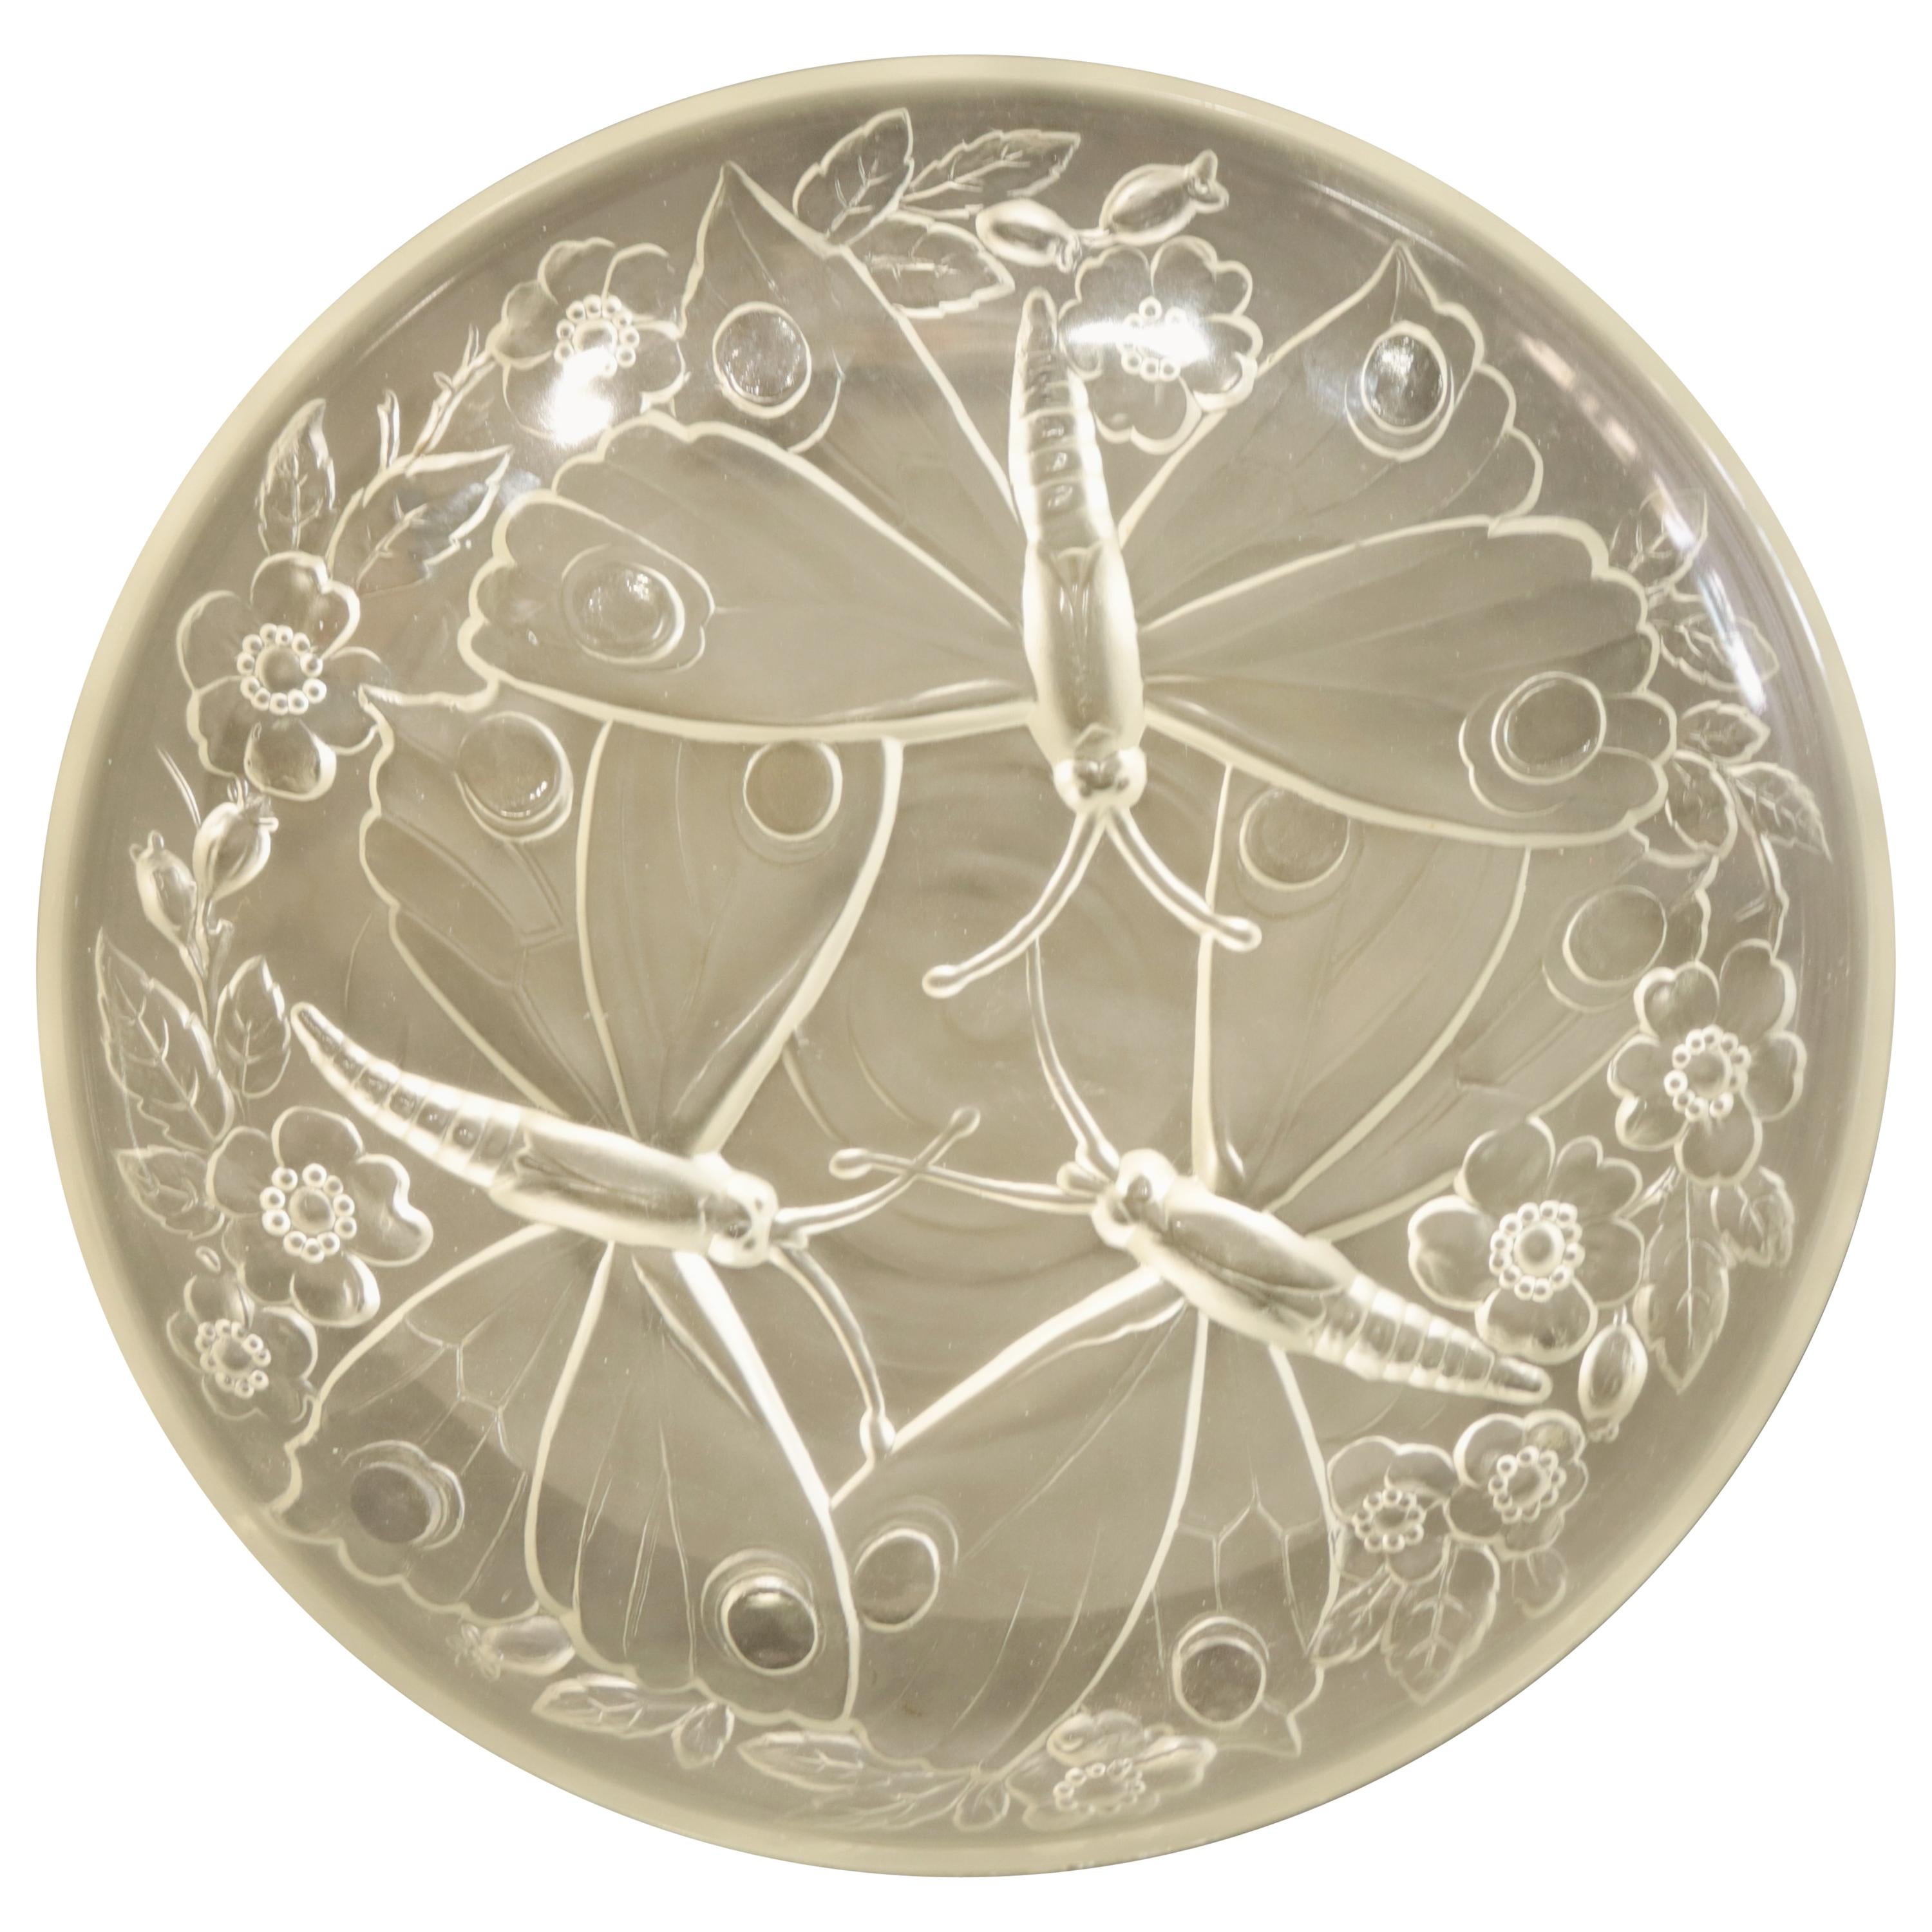 A magnificent French Large Art Nouveau style Butterfly Art Glass Bowl with a high relief floral design with large butterflies surrounding the center, 
French-Verlys--1900s. unmarked
The Charger/ Bowl is a beautiful rendition in the Lalique